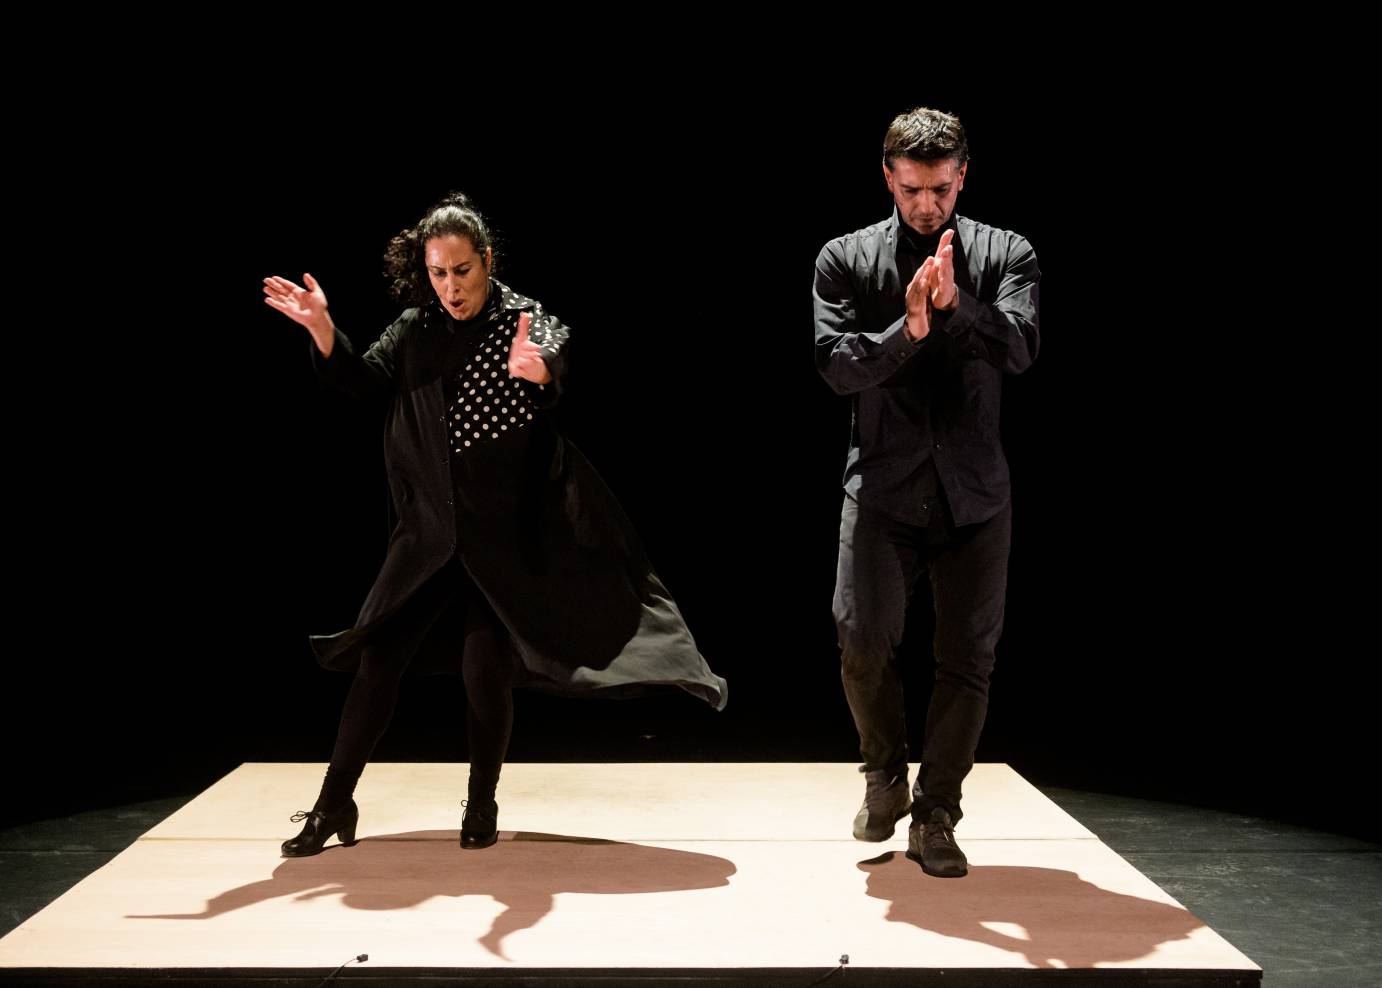 A man and a woman clap their hands and stamp their feet in a flamenco performance